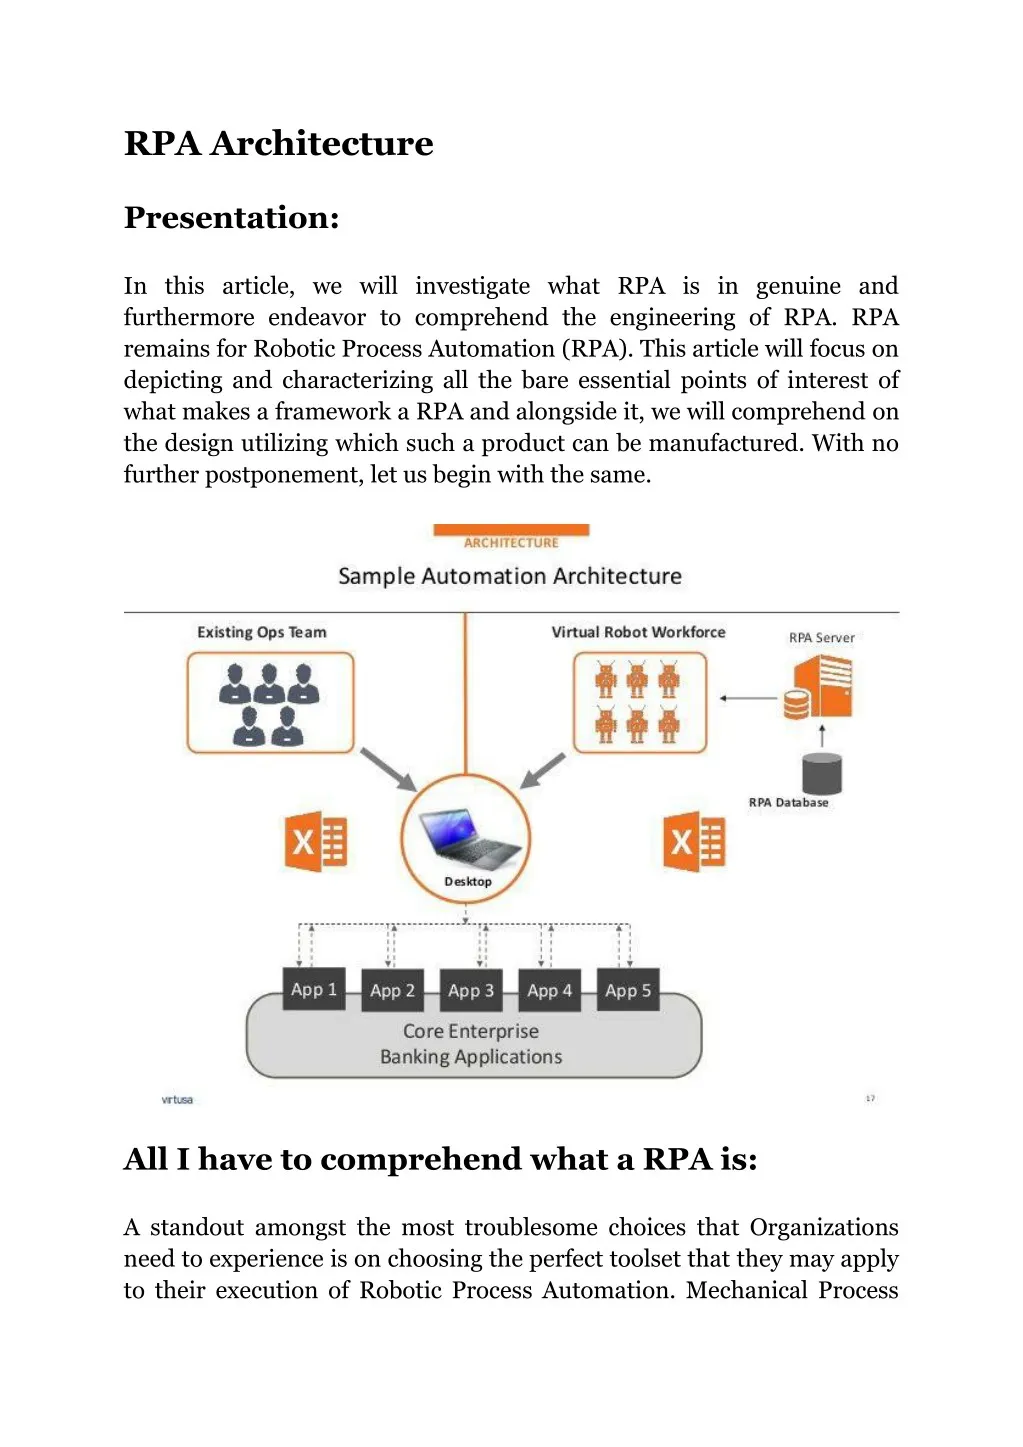 rpa architecture presentation in this article